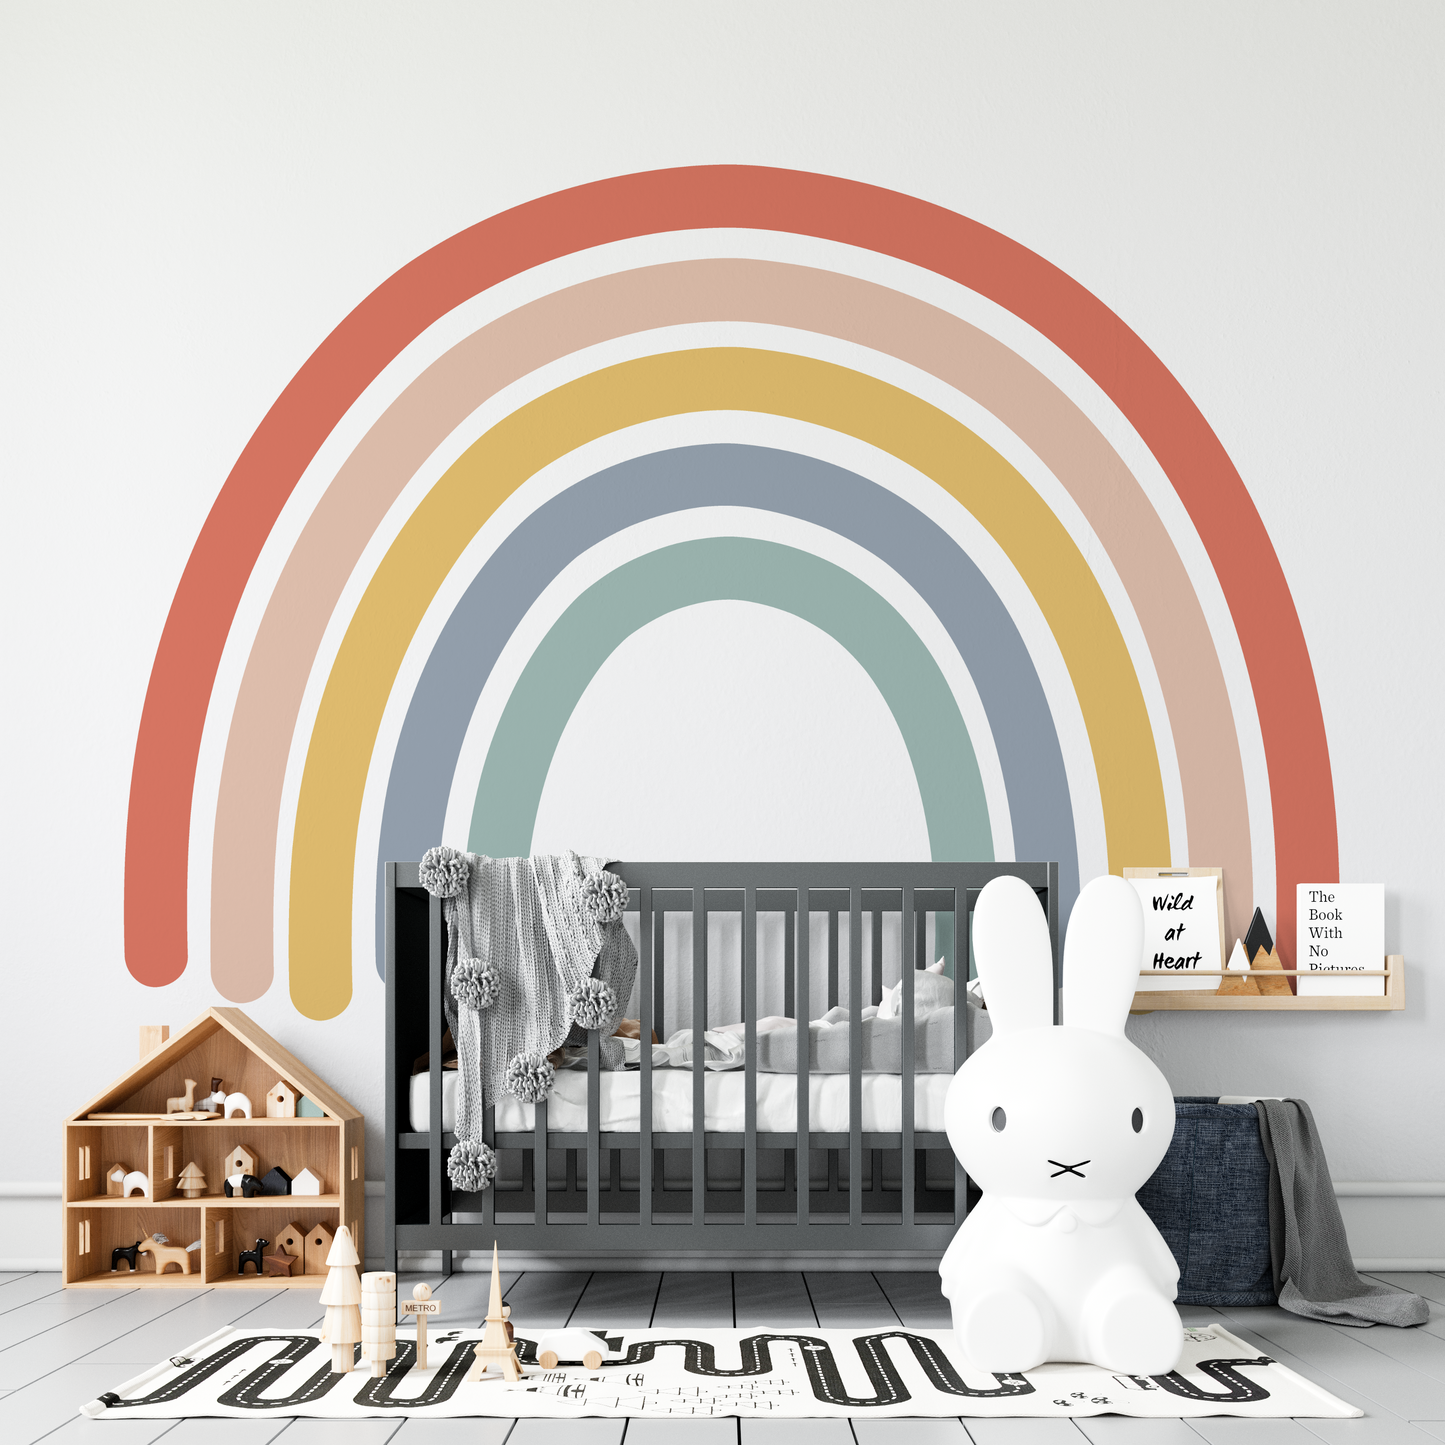 Load image into Gallery viewer, Travelling Rainbow Wallpaper Mural - Munks and Me Wallpaper
